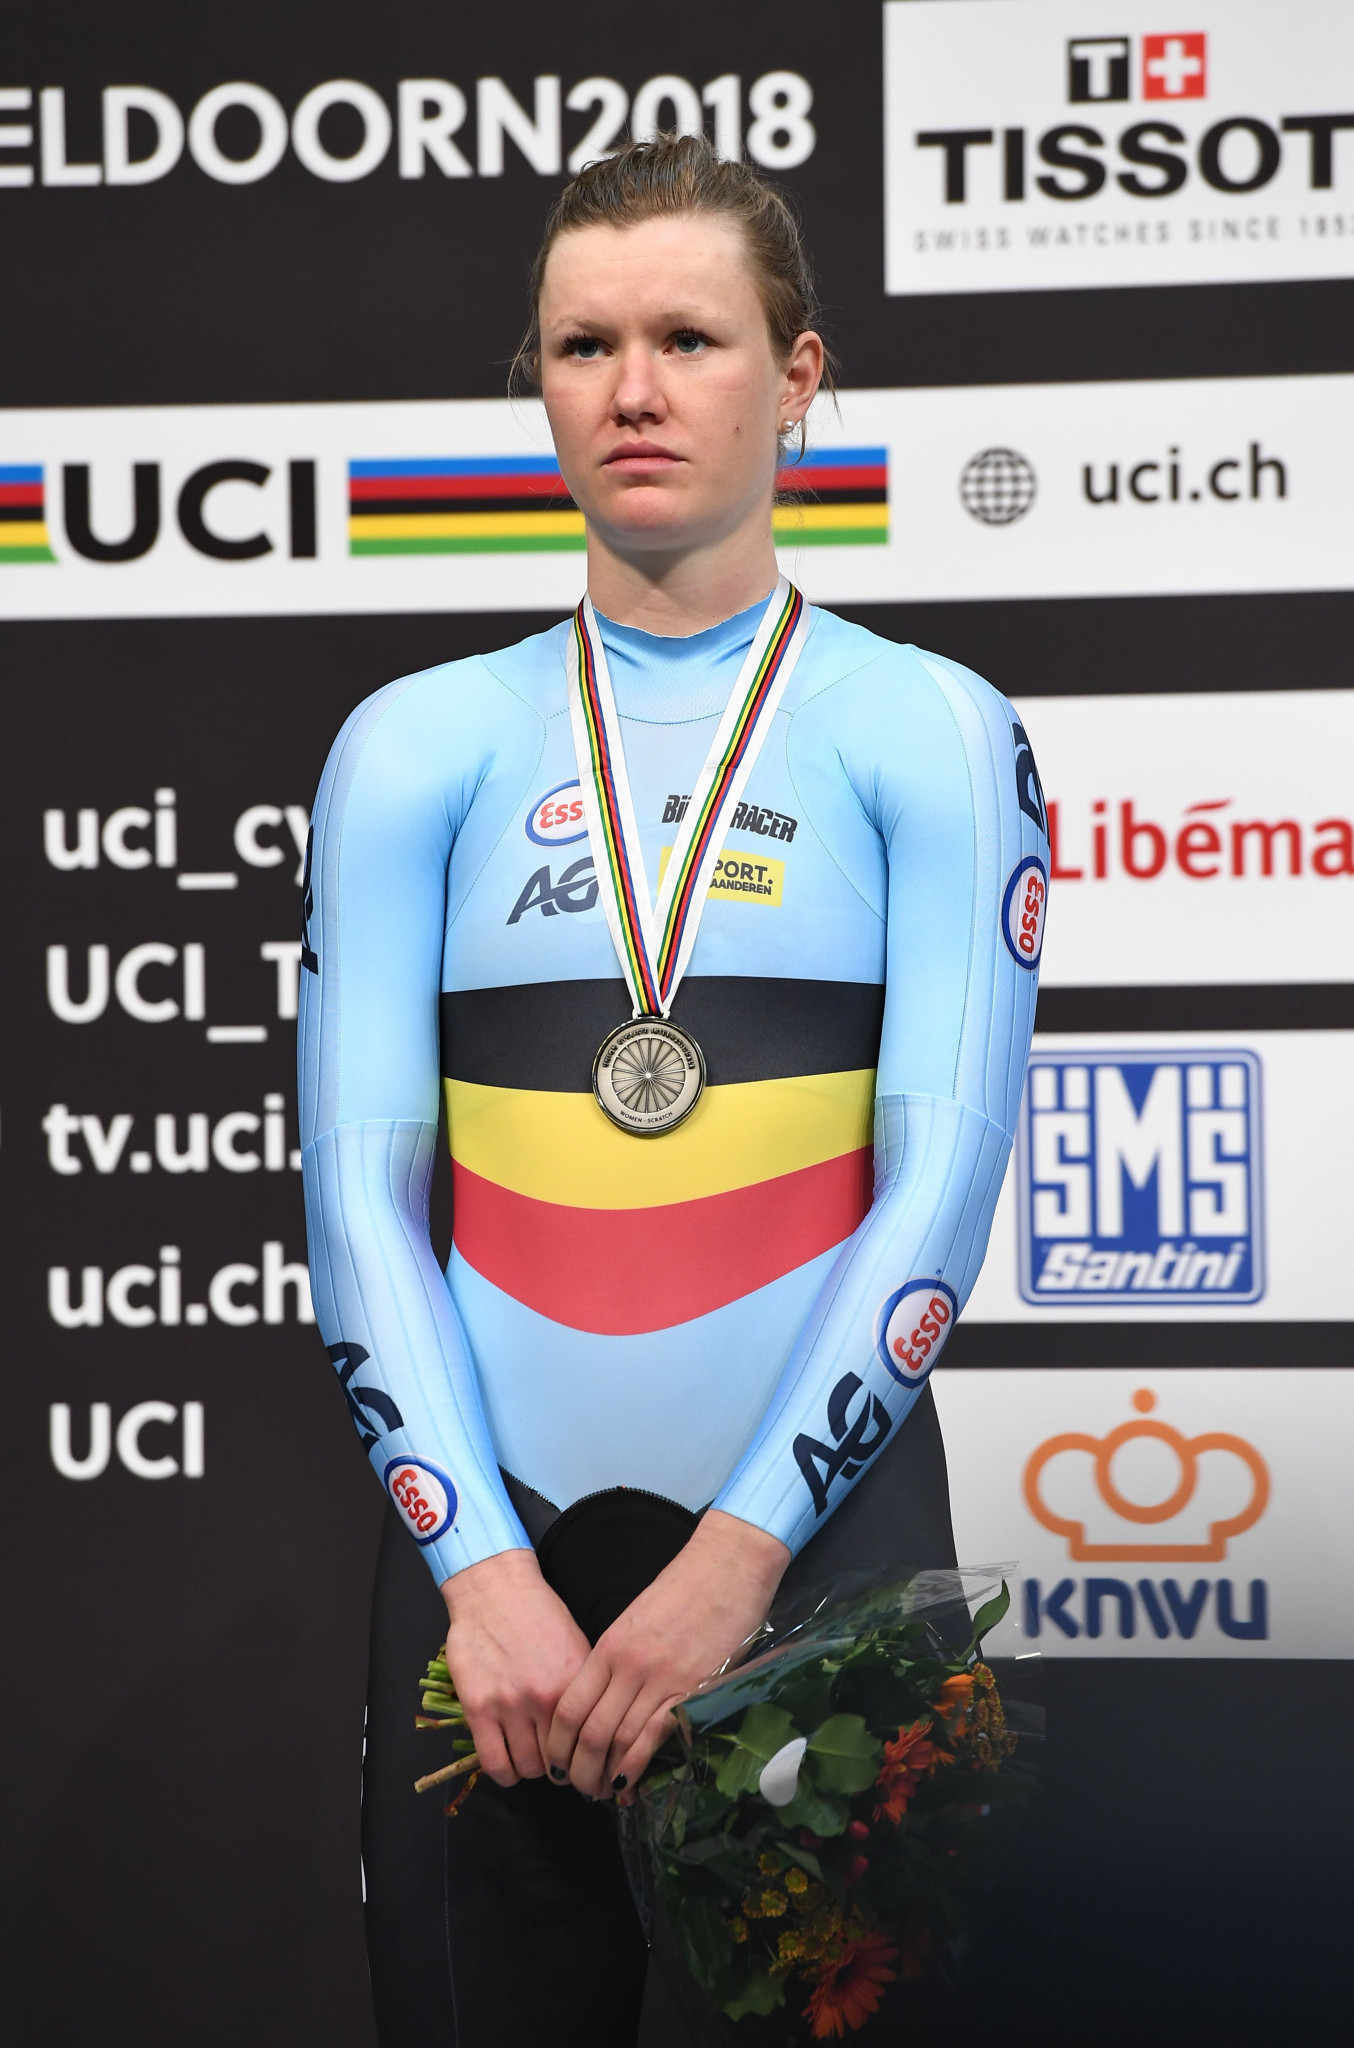 Jolien D’hoore, pictured at last month's UCI World Championships, won the women’s Driedaagse De Panne-Koksijde ©Getty Images